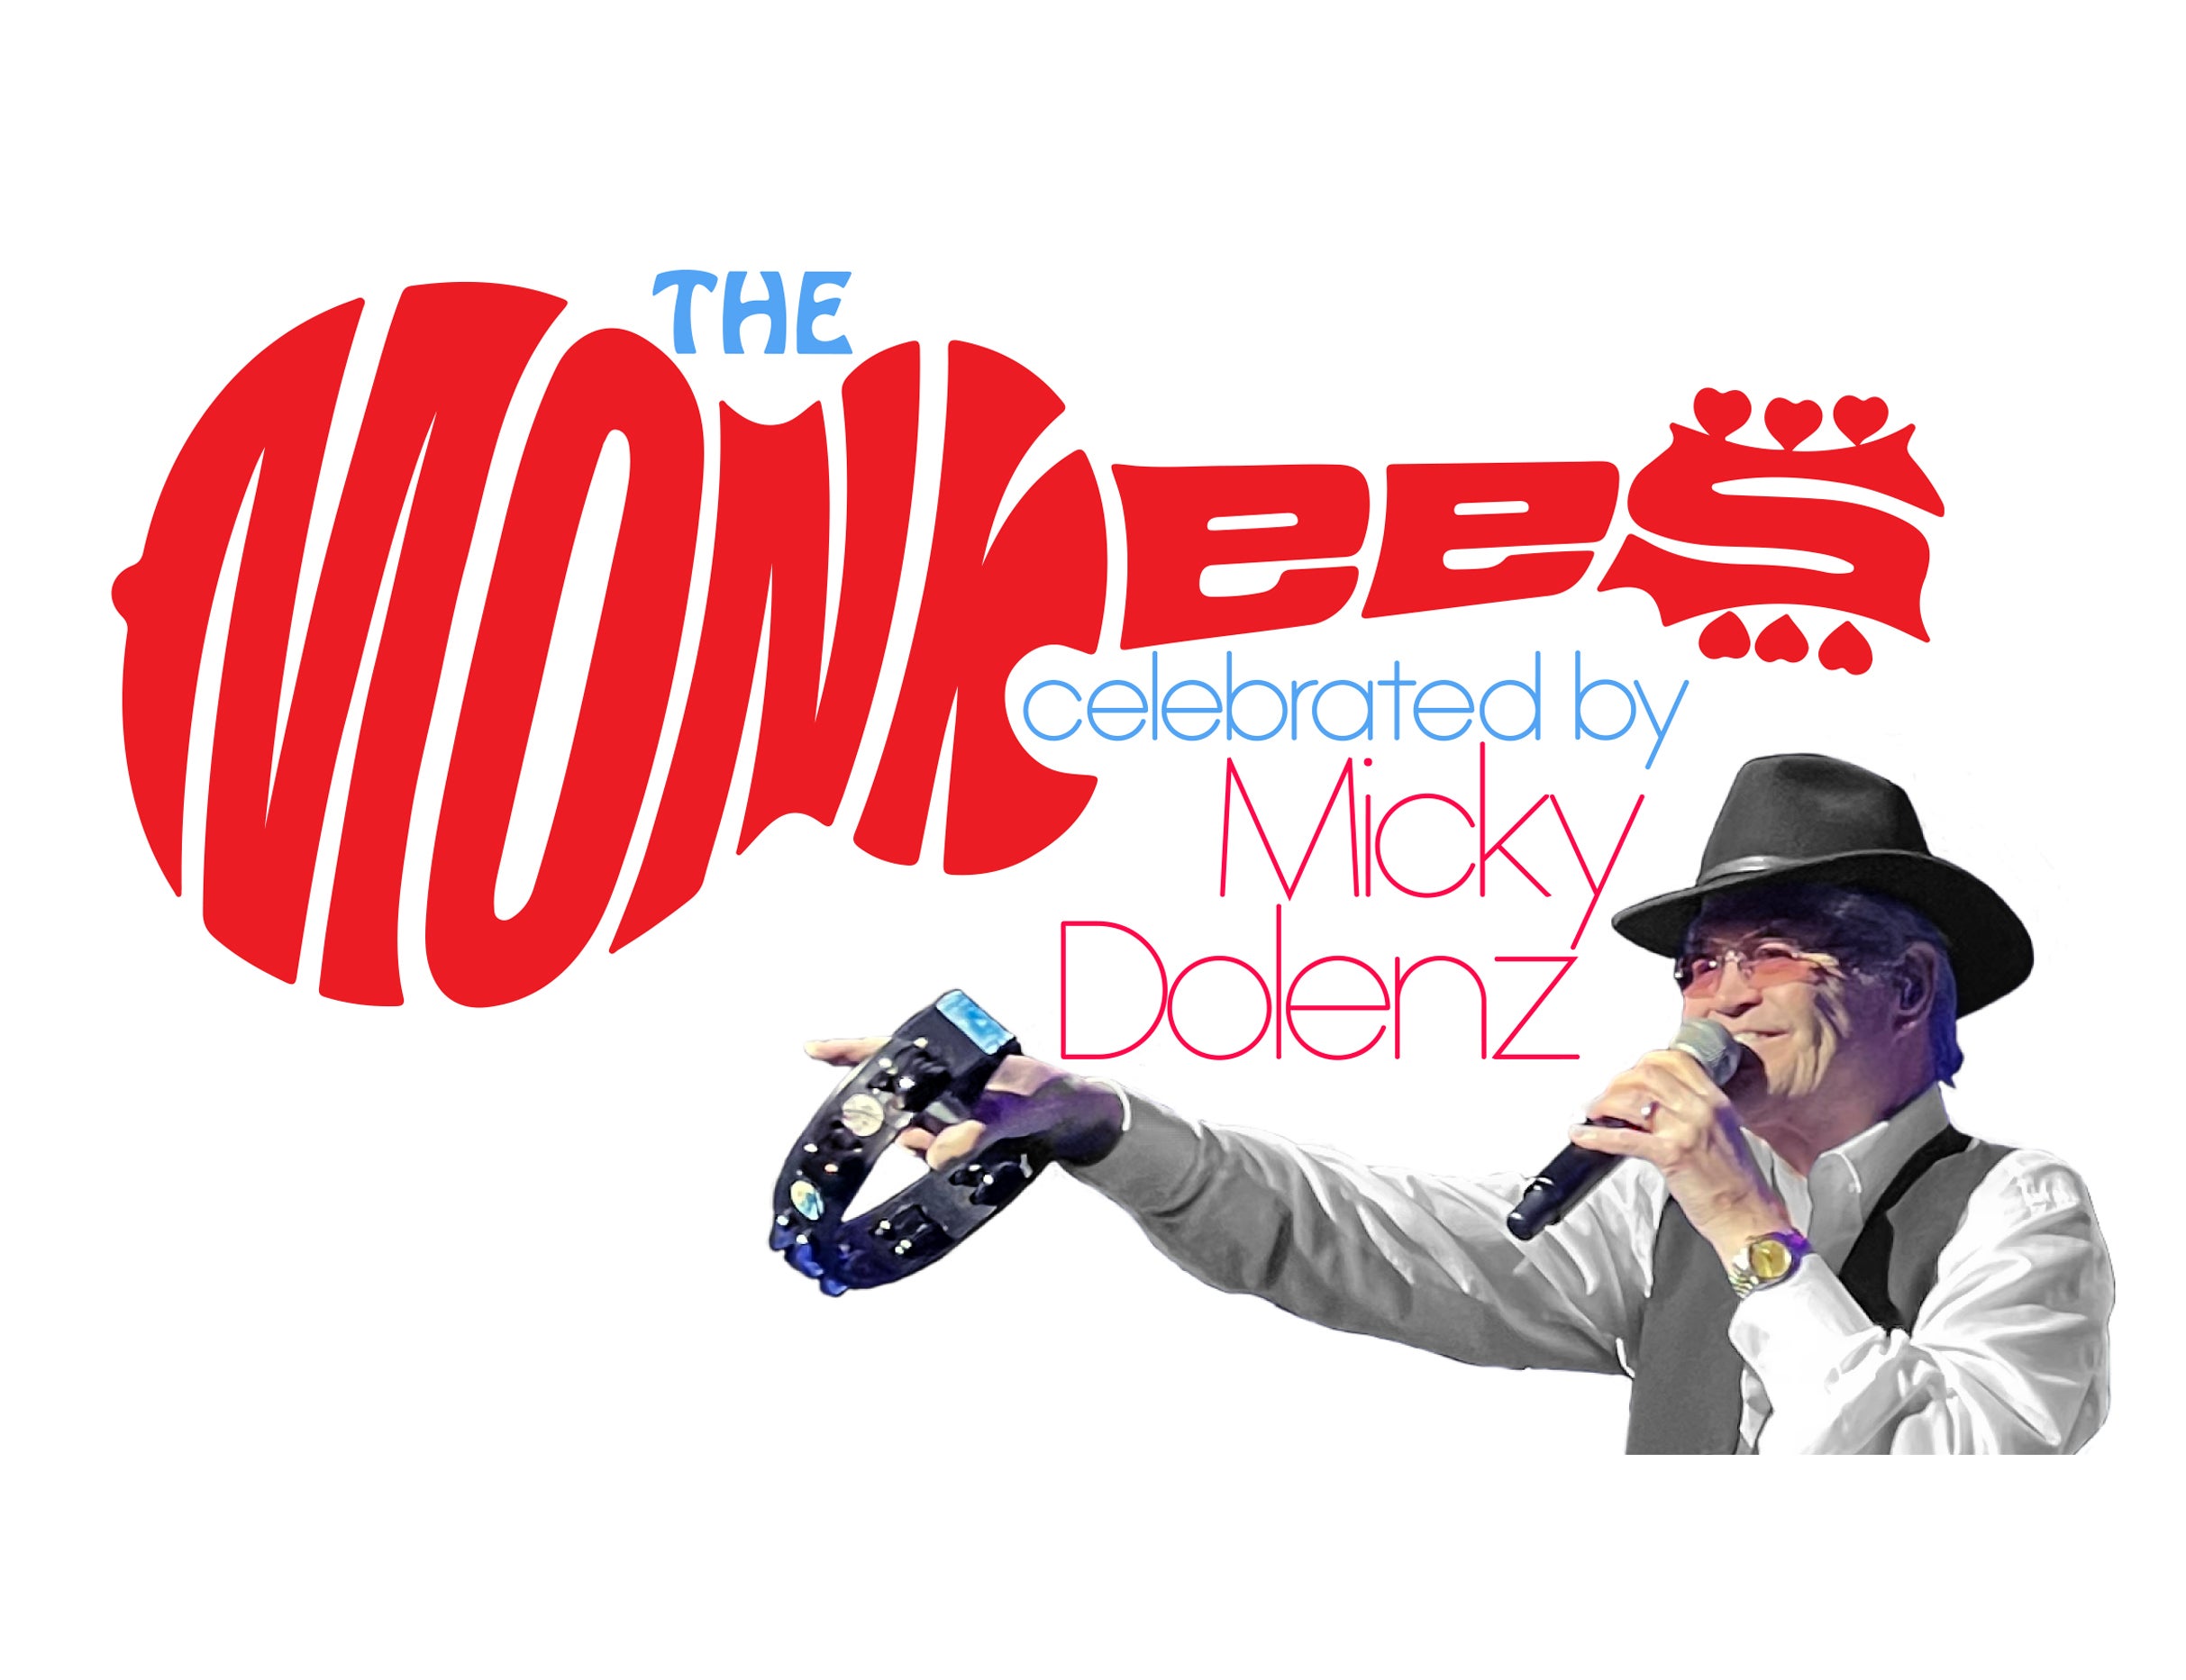 The Monkees Celebrated By Micky Dolenz in Minneapolis promo photo for Hennepin Theatre Trust presale offer code